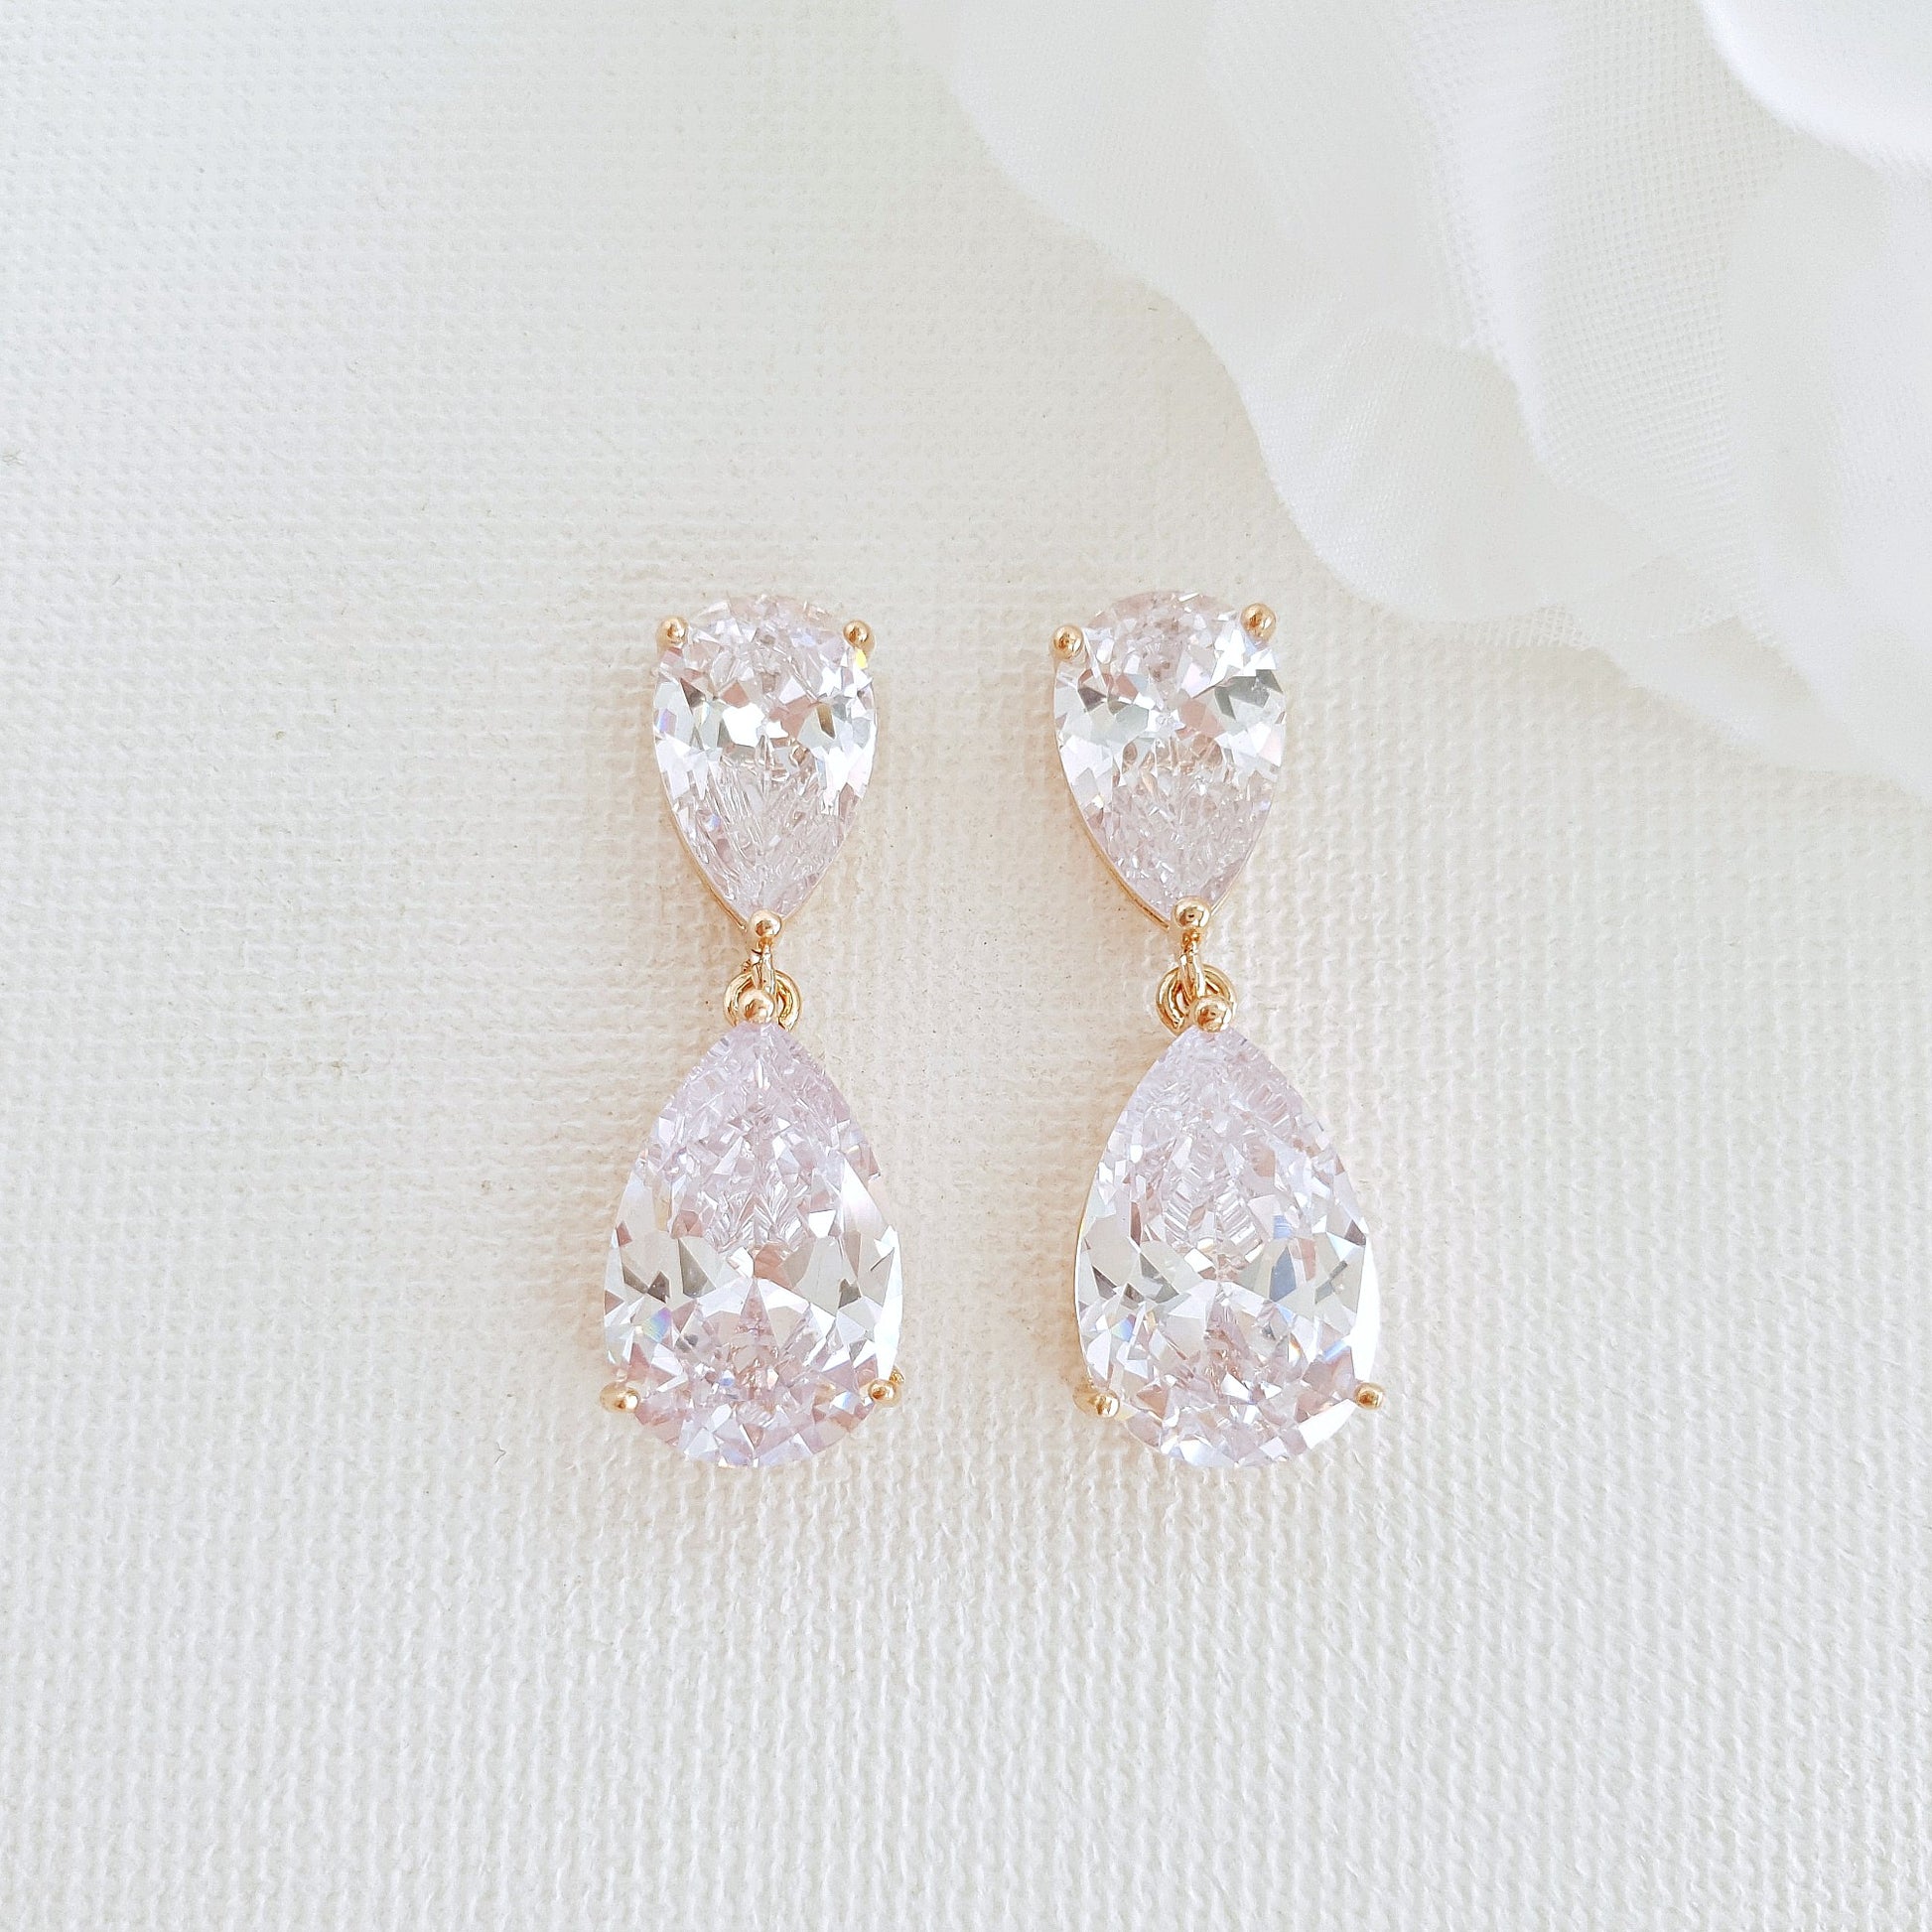 Rose Gold diamante earrings for brides and bridesmaids- Poetry Designs